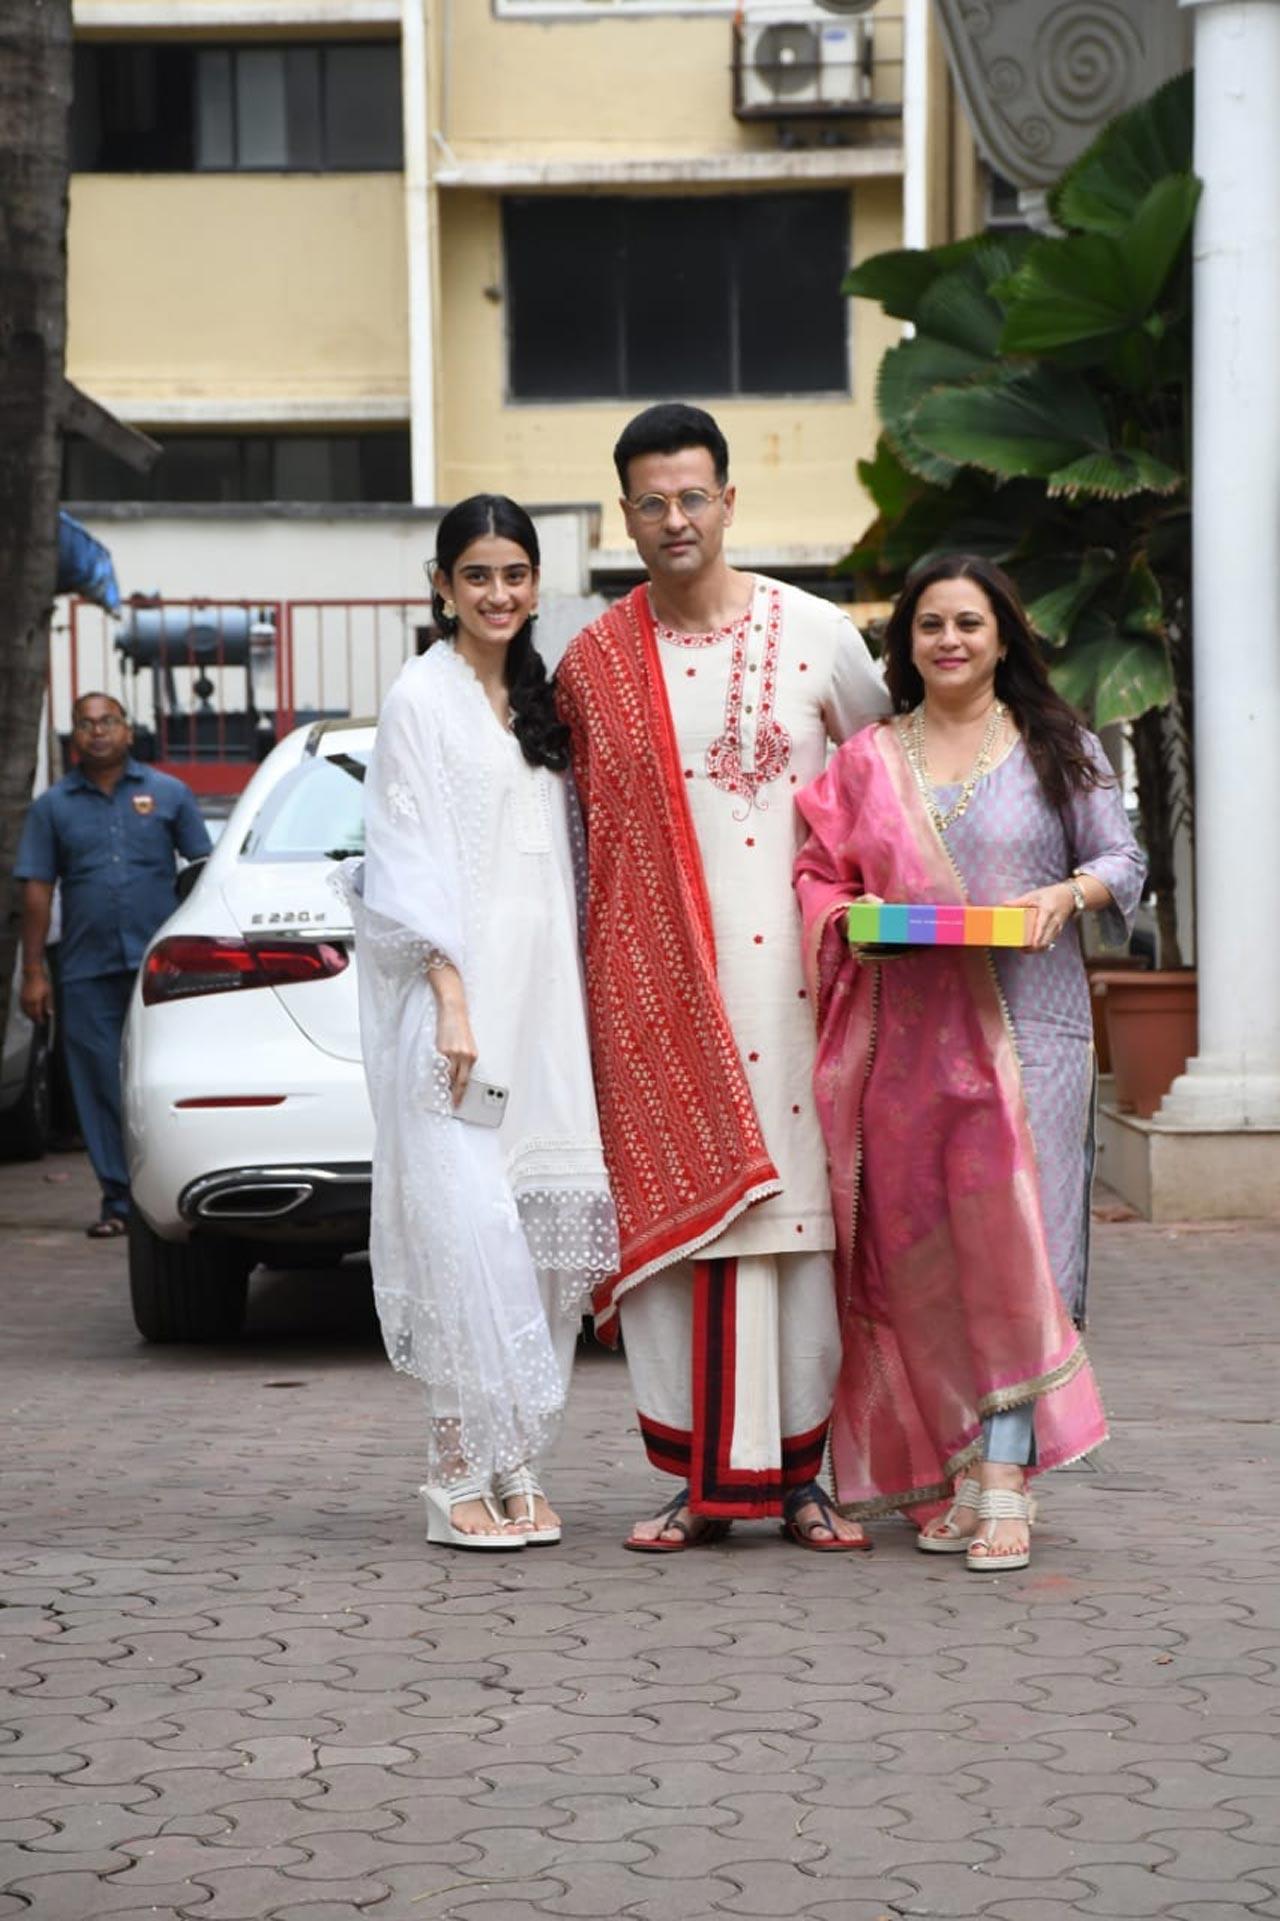 Rohit Roy also attended the festival along with his wife Manasi Joshi Roy and daughter Kiara Bose Roy